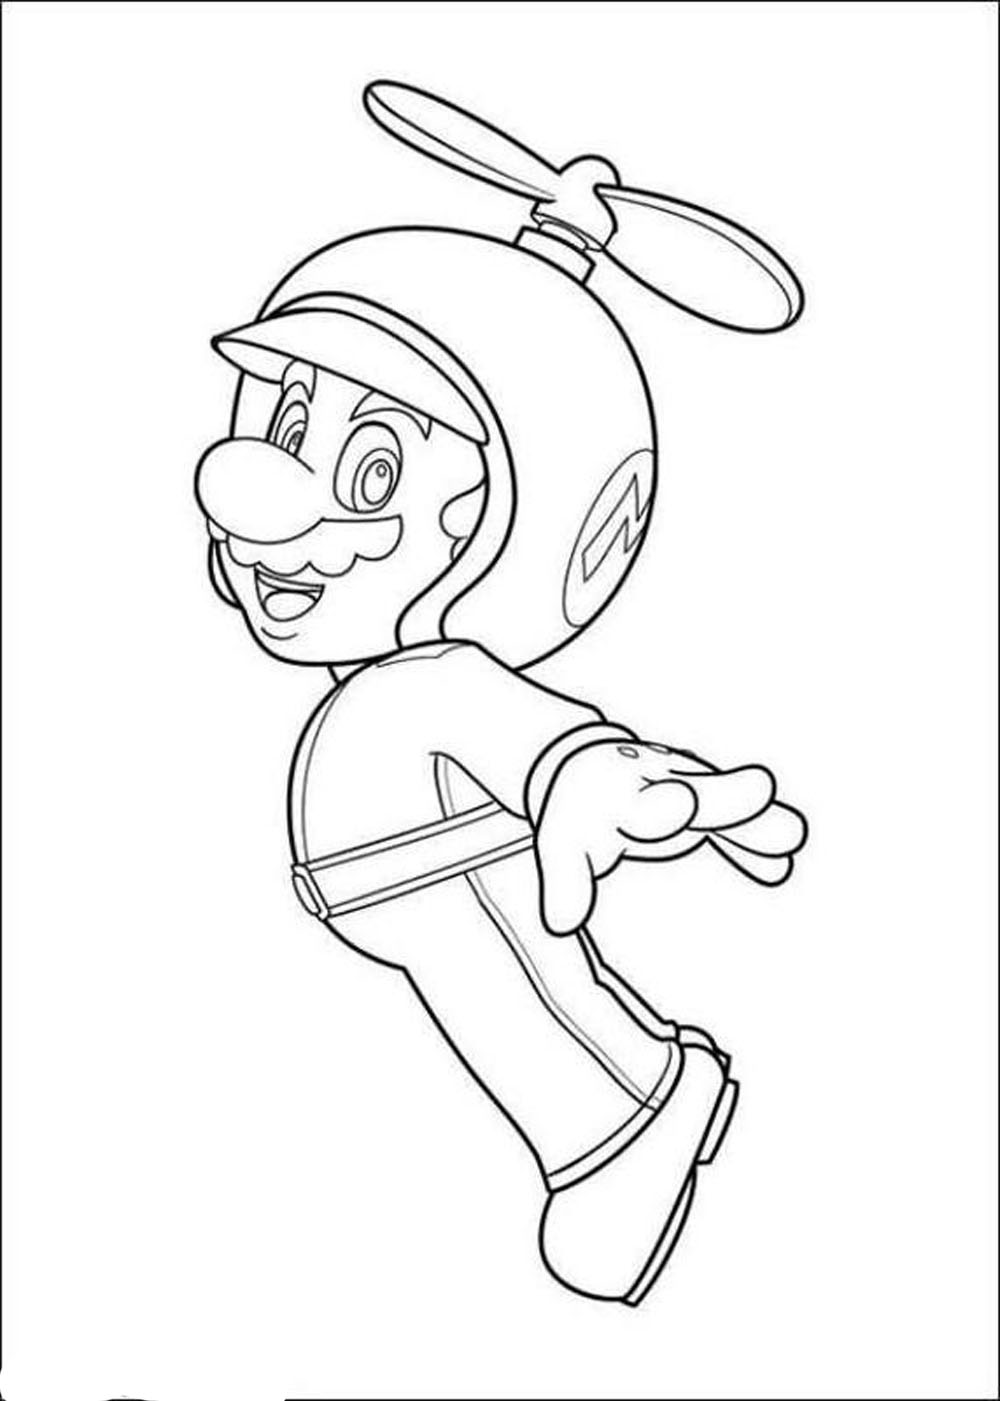 printable-mario-coloring-pages